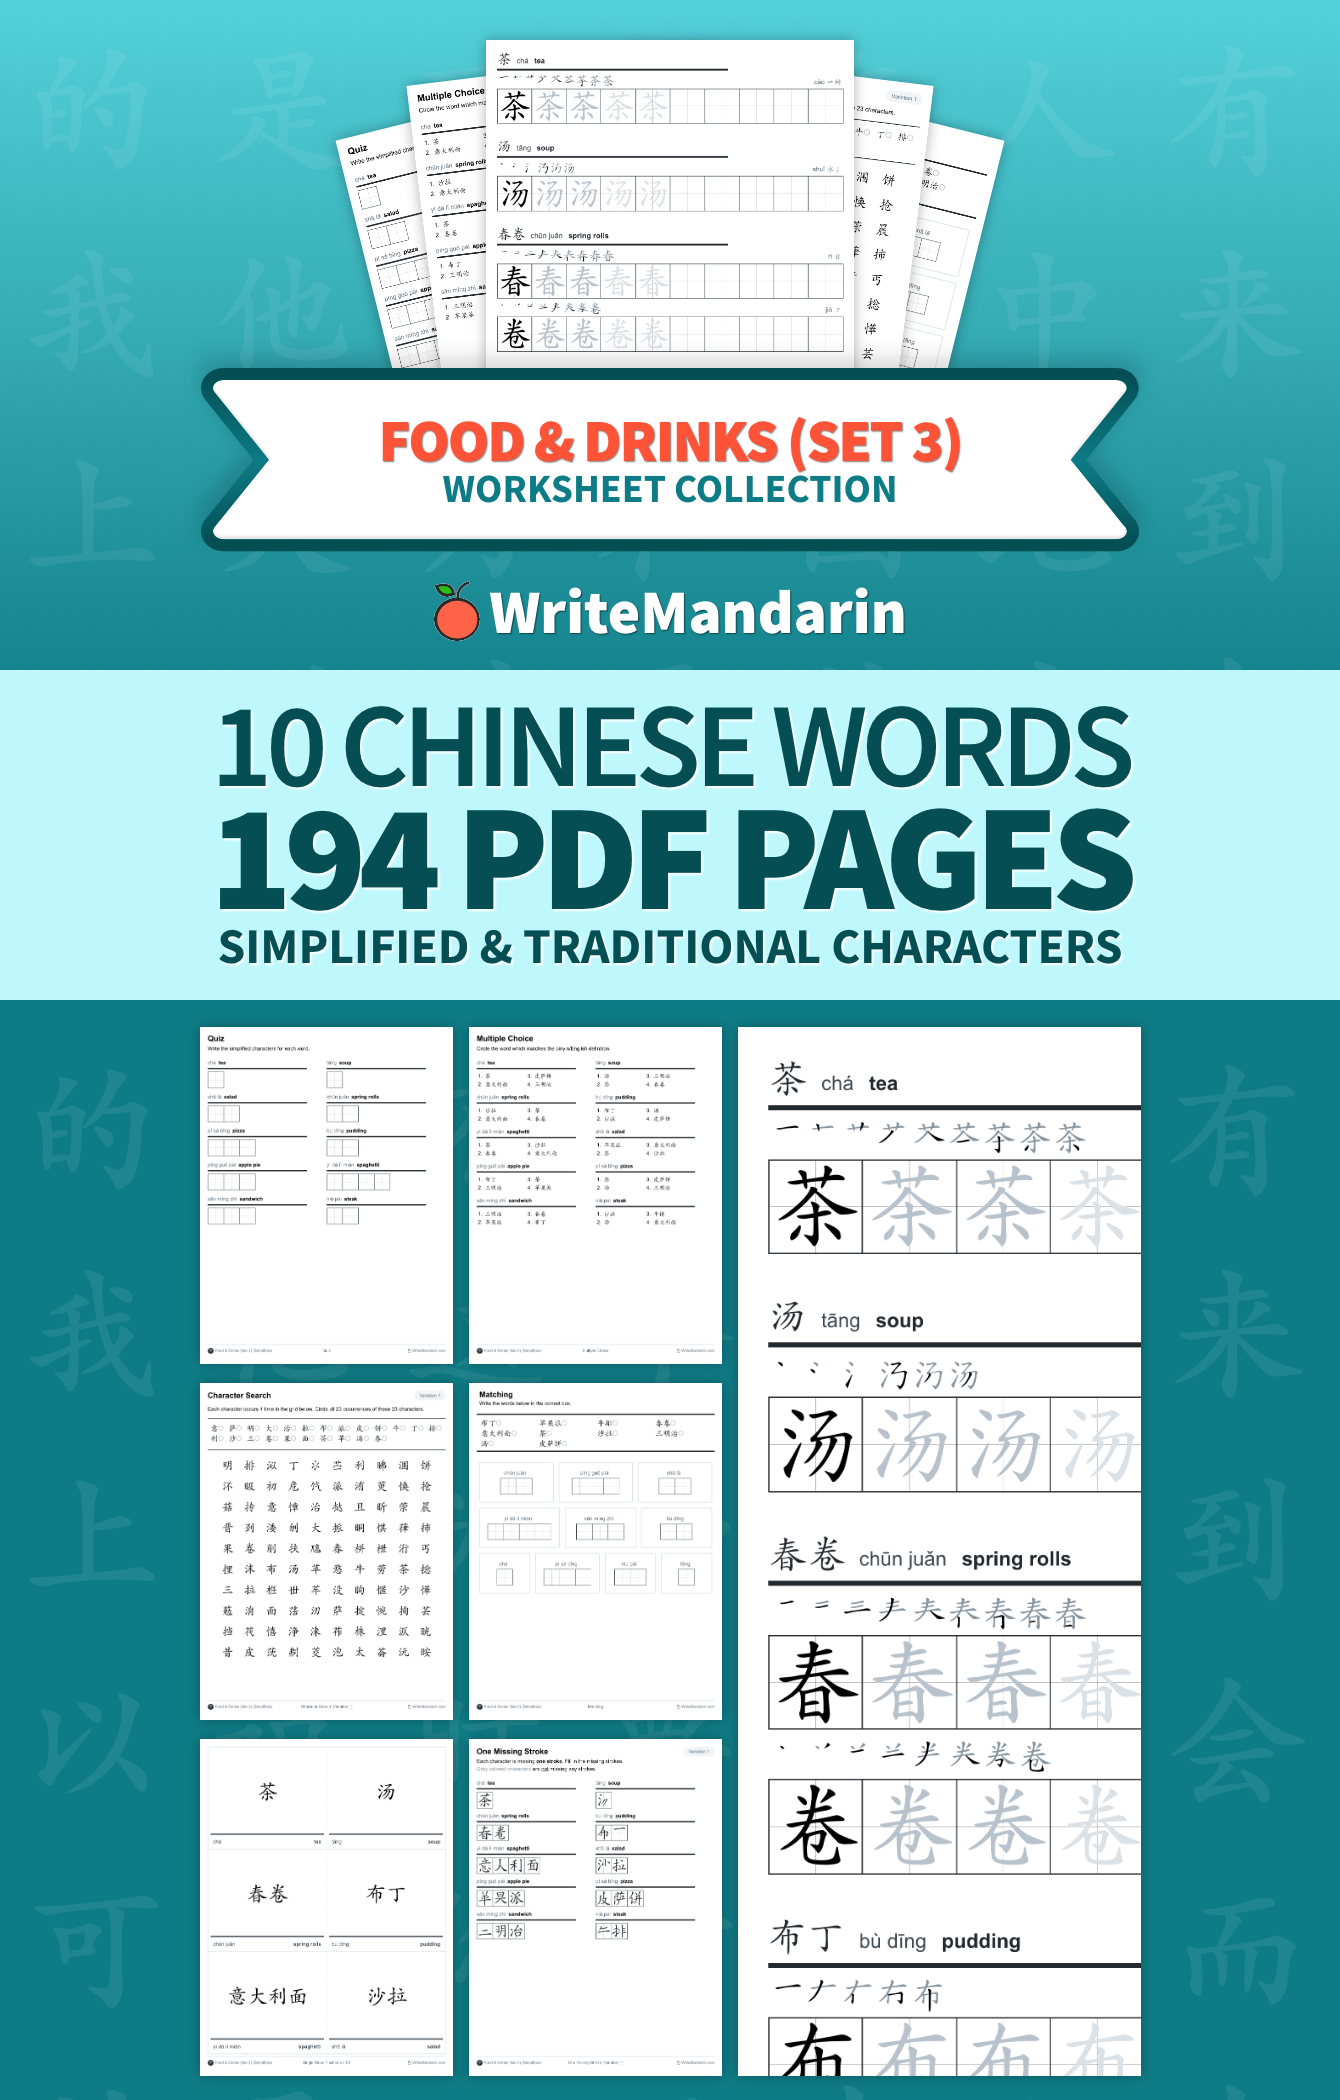 Preview image of Food & Drinks (Set 3) worksheet collection